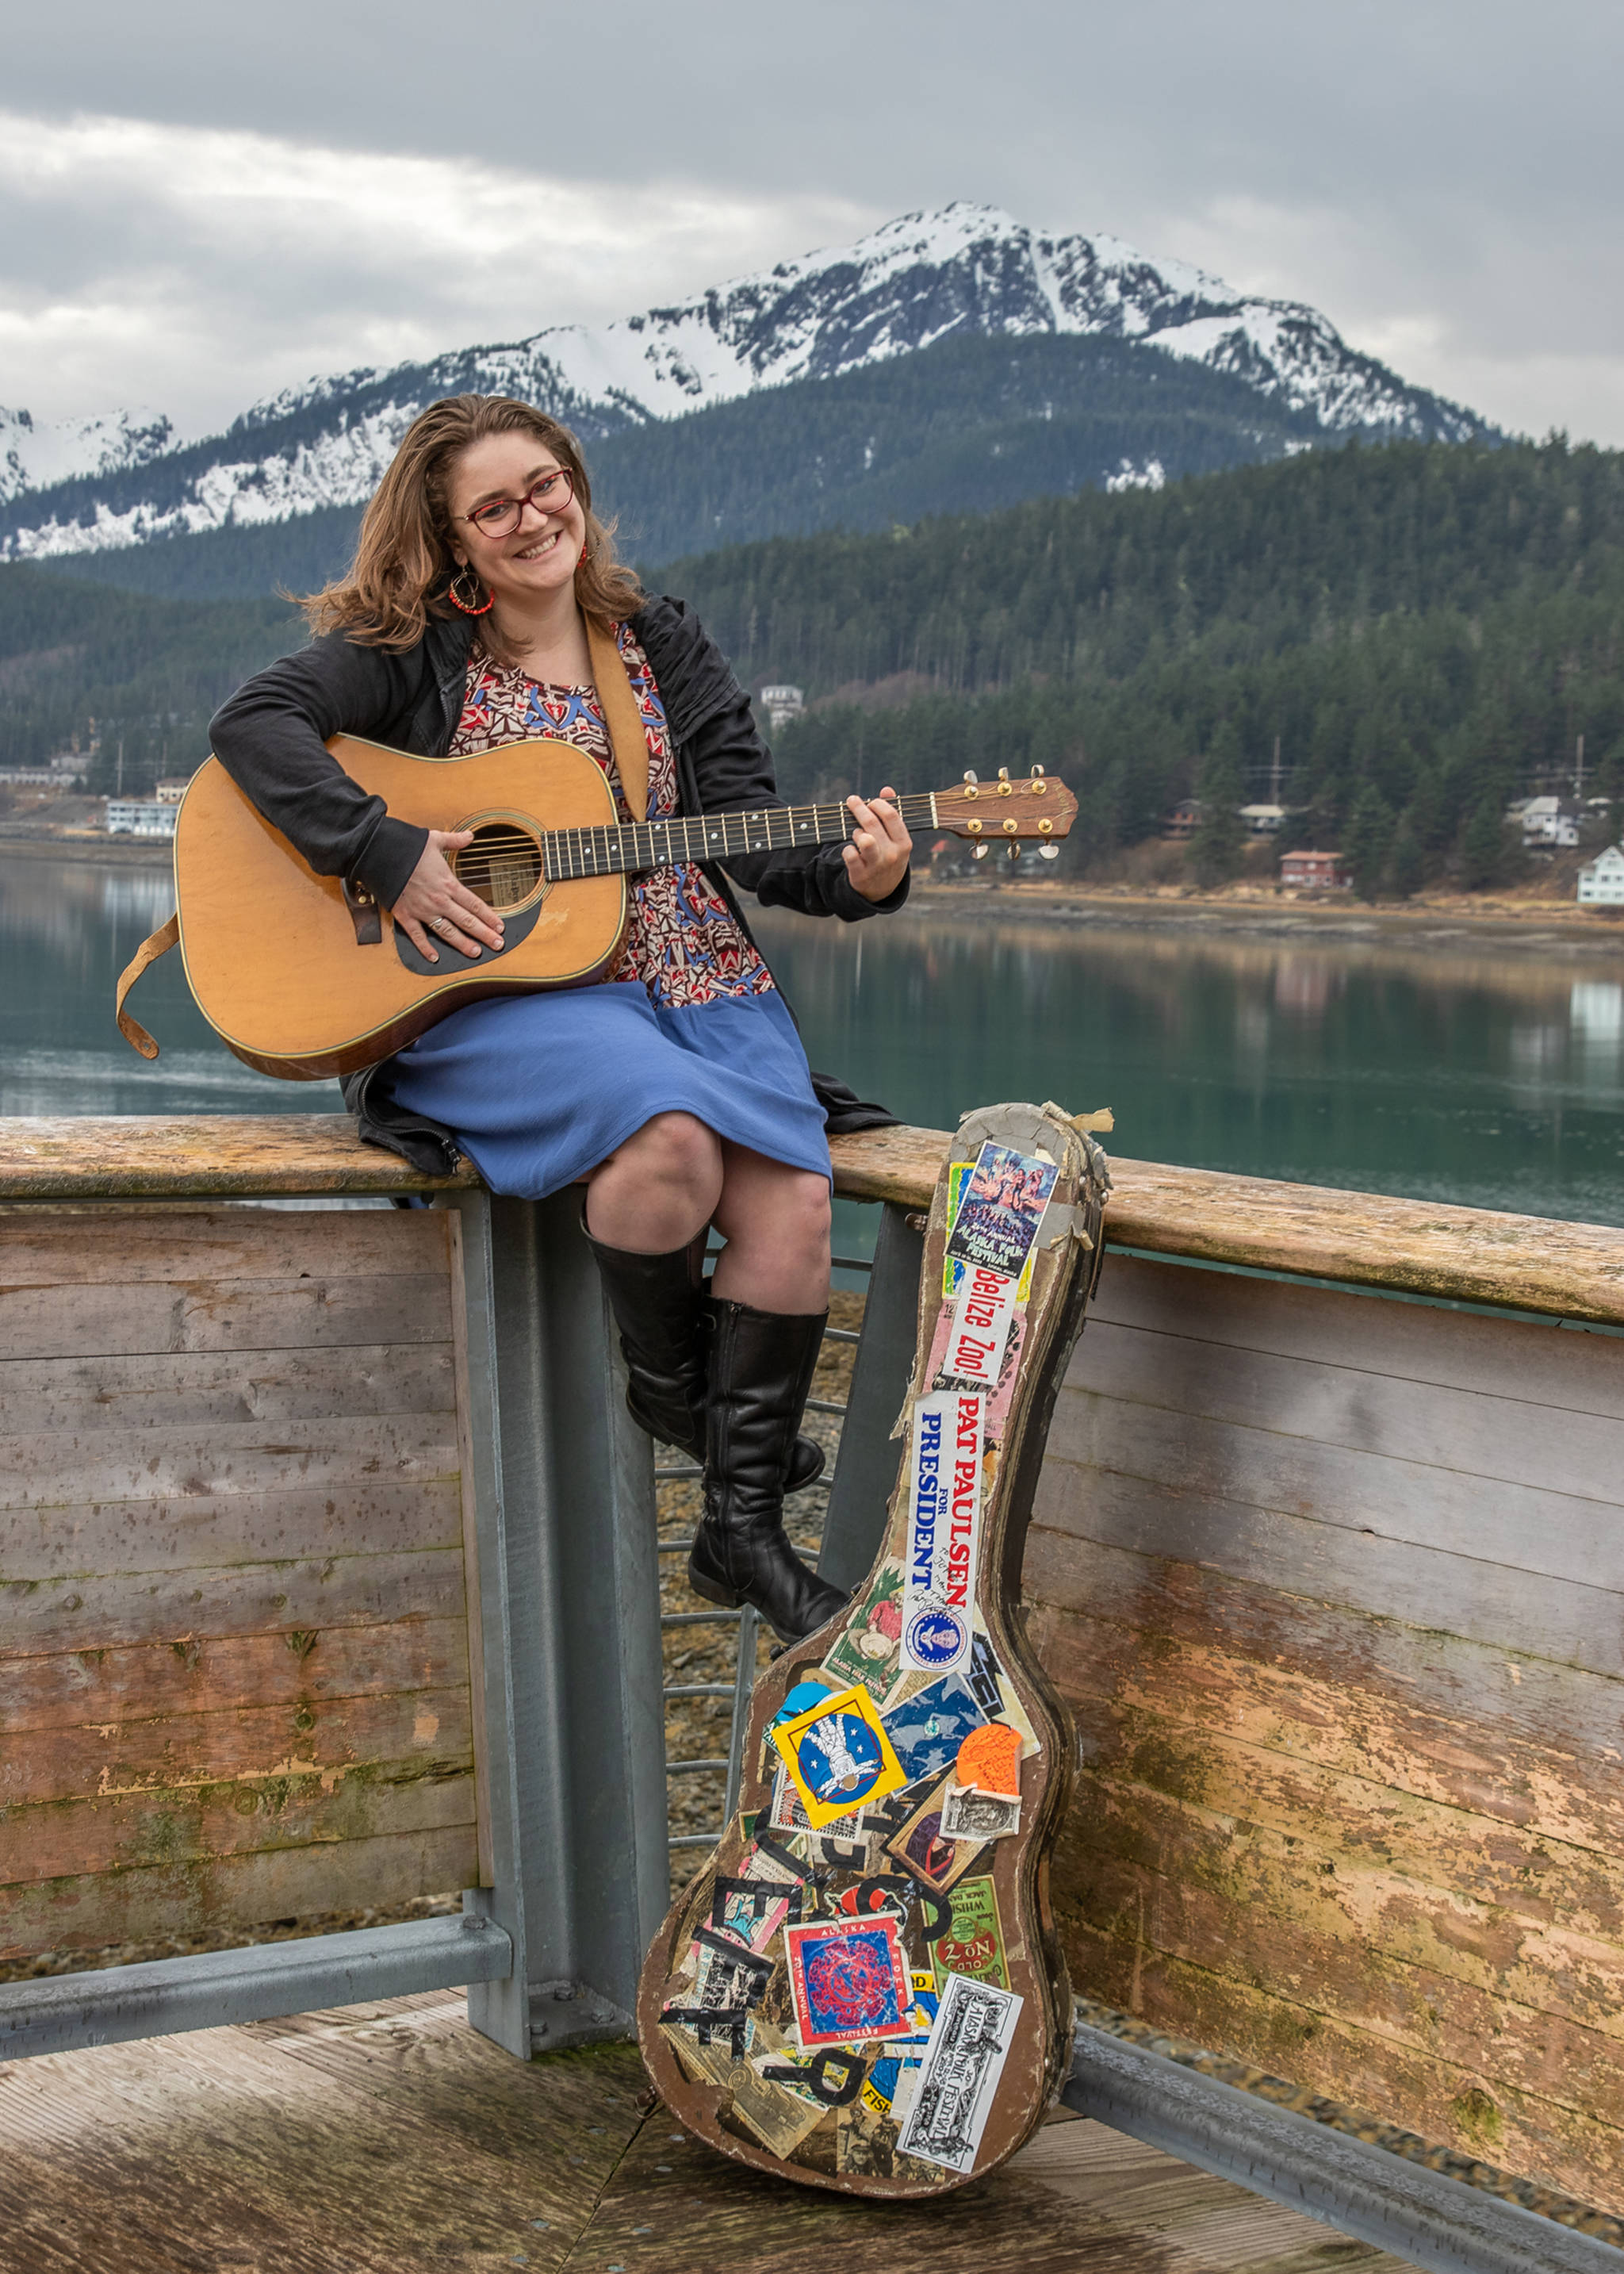 April 14, 2019: The Alaska Folk Festival has a style all its own as does Callie Conerton. Callie first appeared on stage at this annual event when she was 2 years old and has played on stage there many times since. This day she wore a colorful empire waist dress from LuLaRoe, a black jacket from Prairie Grass, and black leather boots from Bos. & Co. Her essential accessories include her red glasses, red and gold beaded hoop earrings that her mom Maureen Conerton got while traveling, and an A LoPrinzi guitar that belongs to her dad Jeff Brown, which has been played in every Folk Fest since 1975.